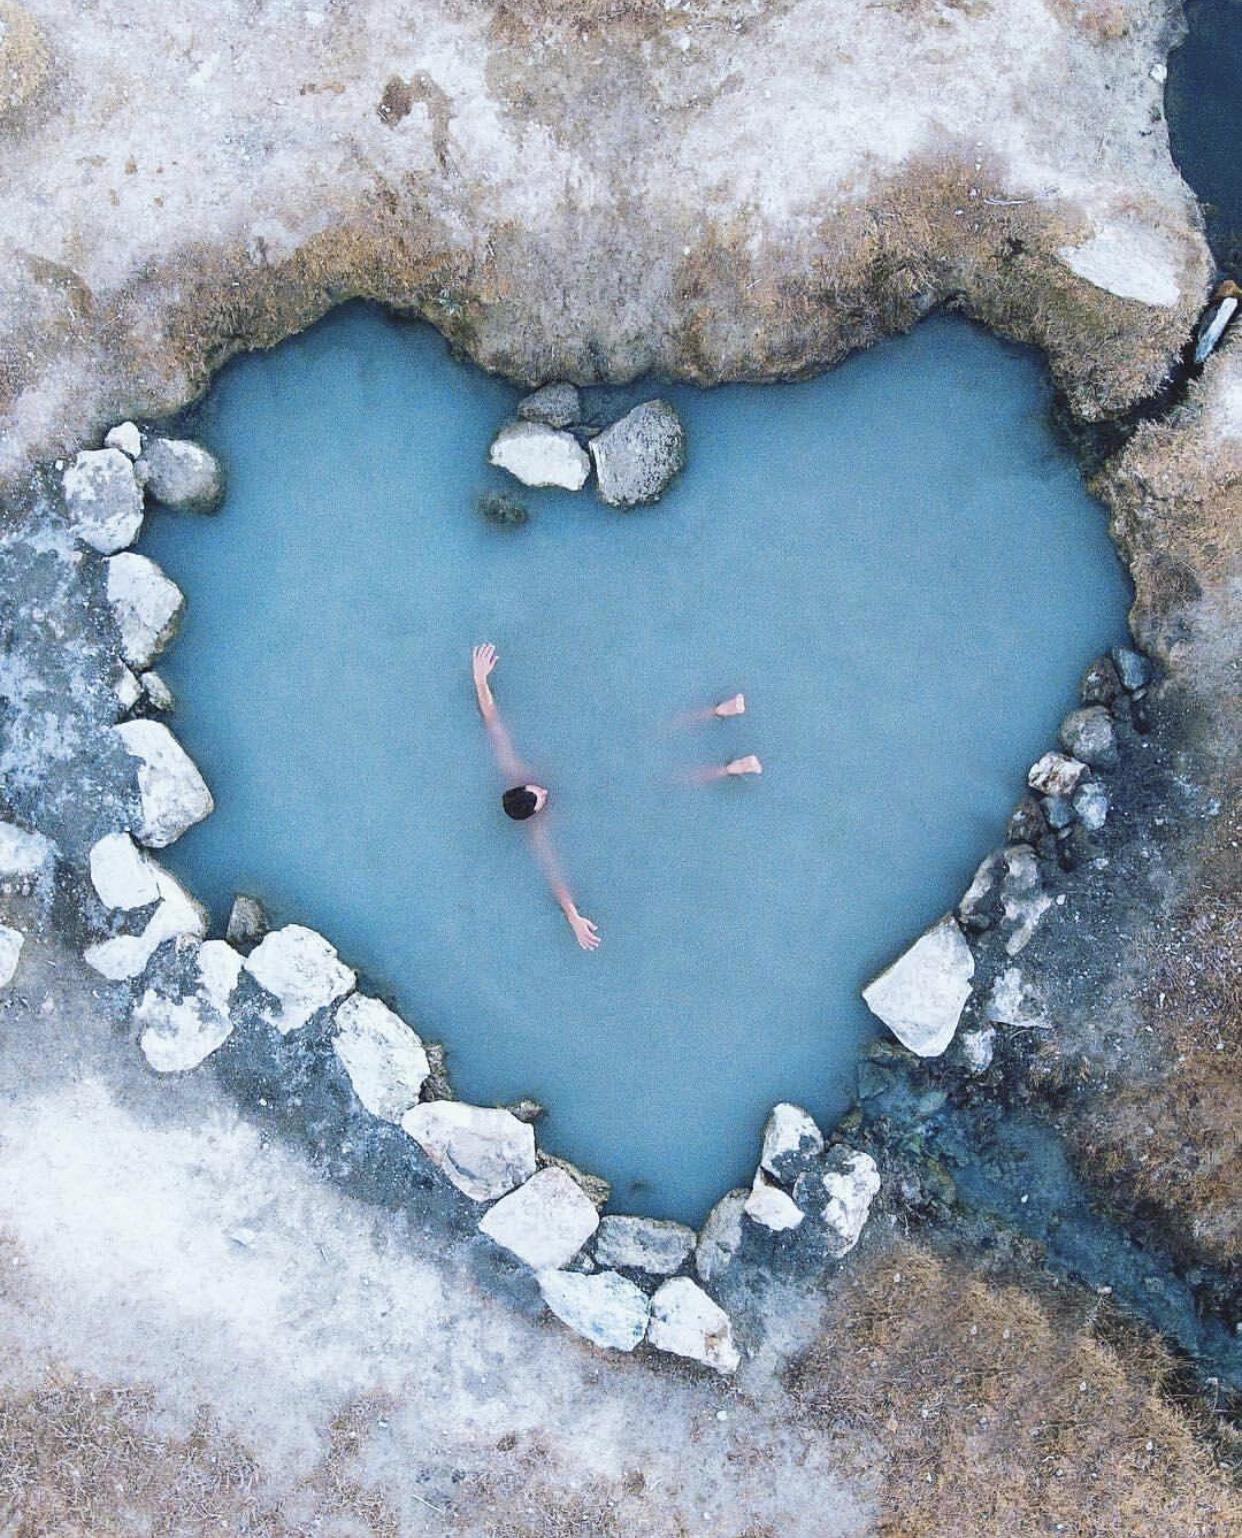 Wild Willy's Heart Shaped Hot Spring near Mammoth Lakes